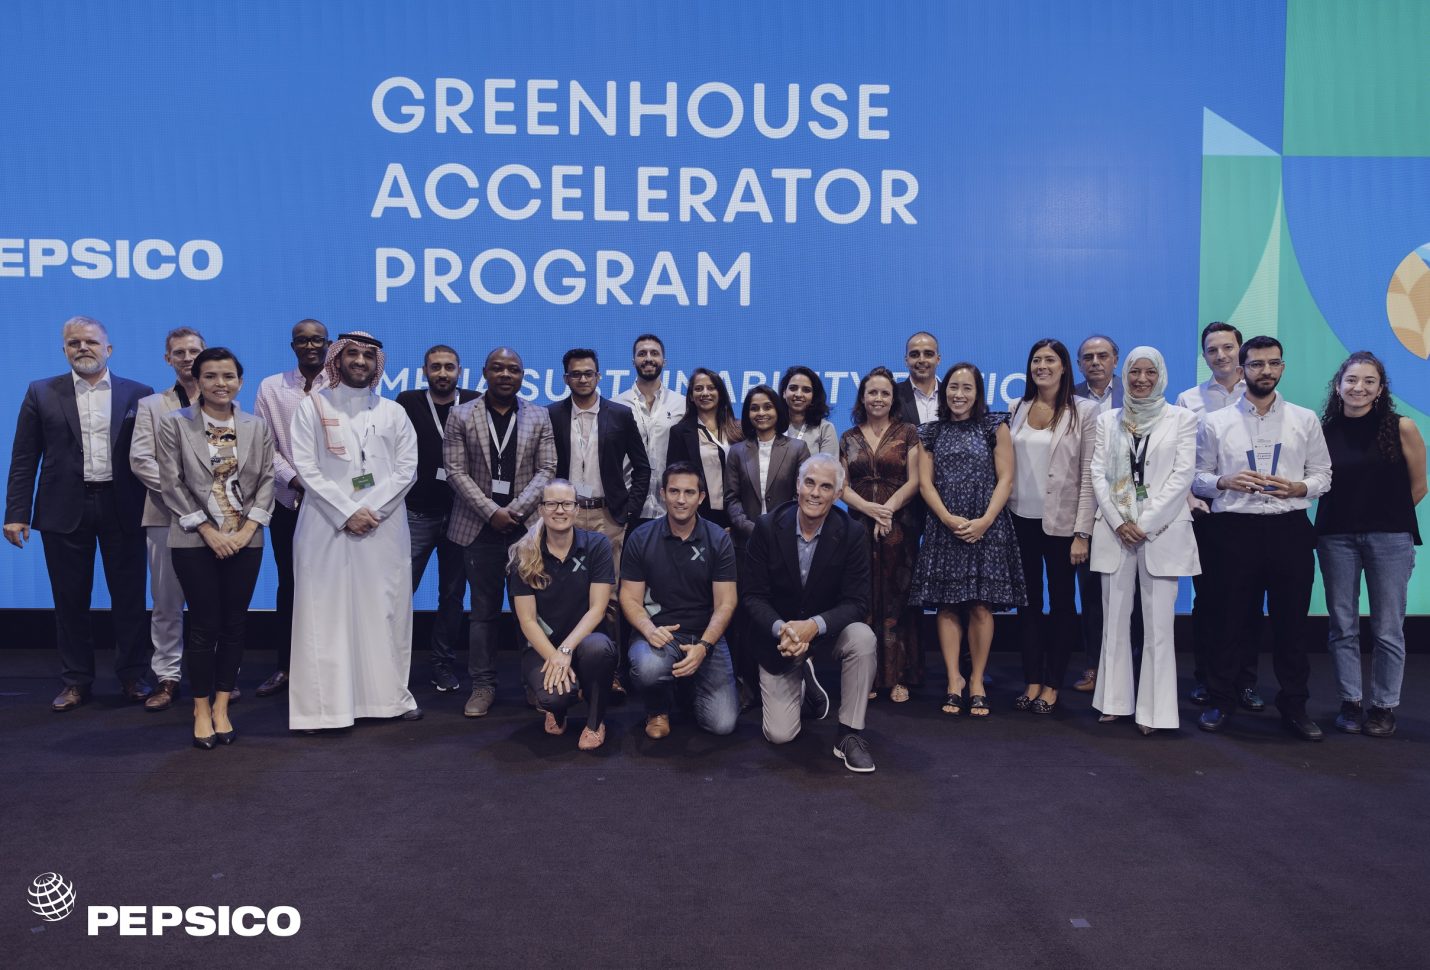 PepsiCo’s Greenhouse Accelerator Program expanded to include Egyptian start-ups for 1st time